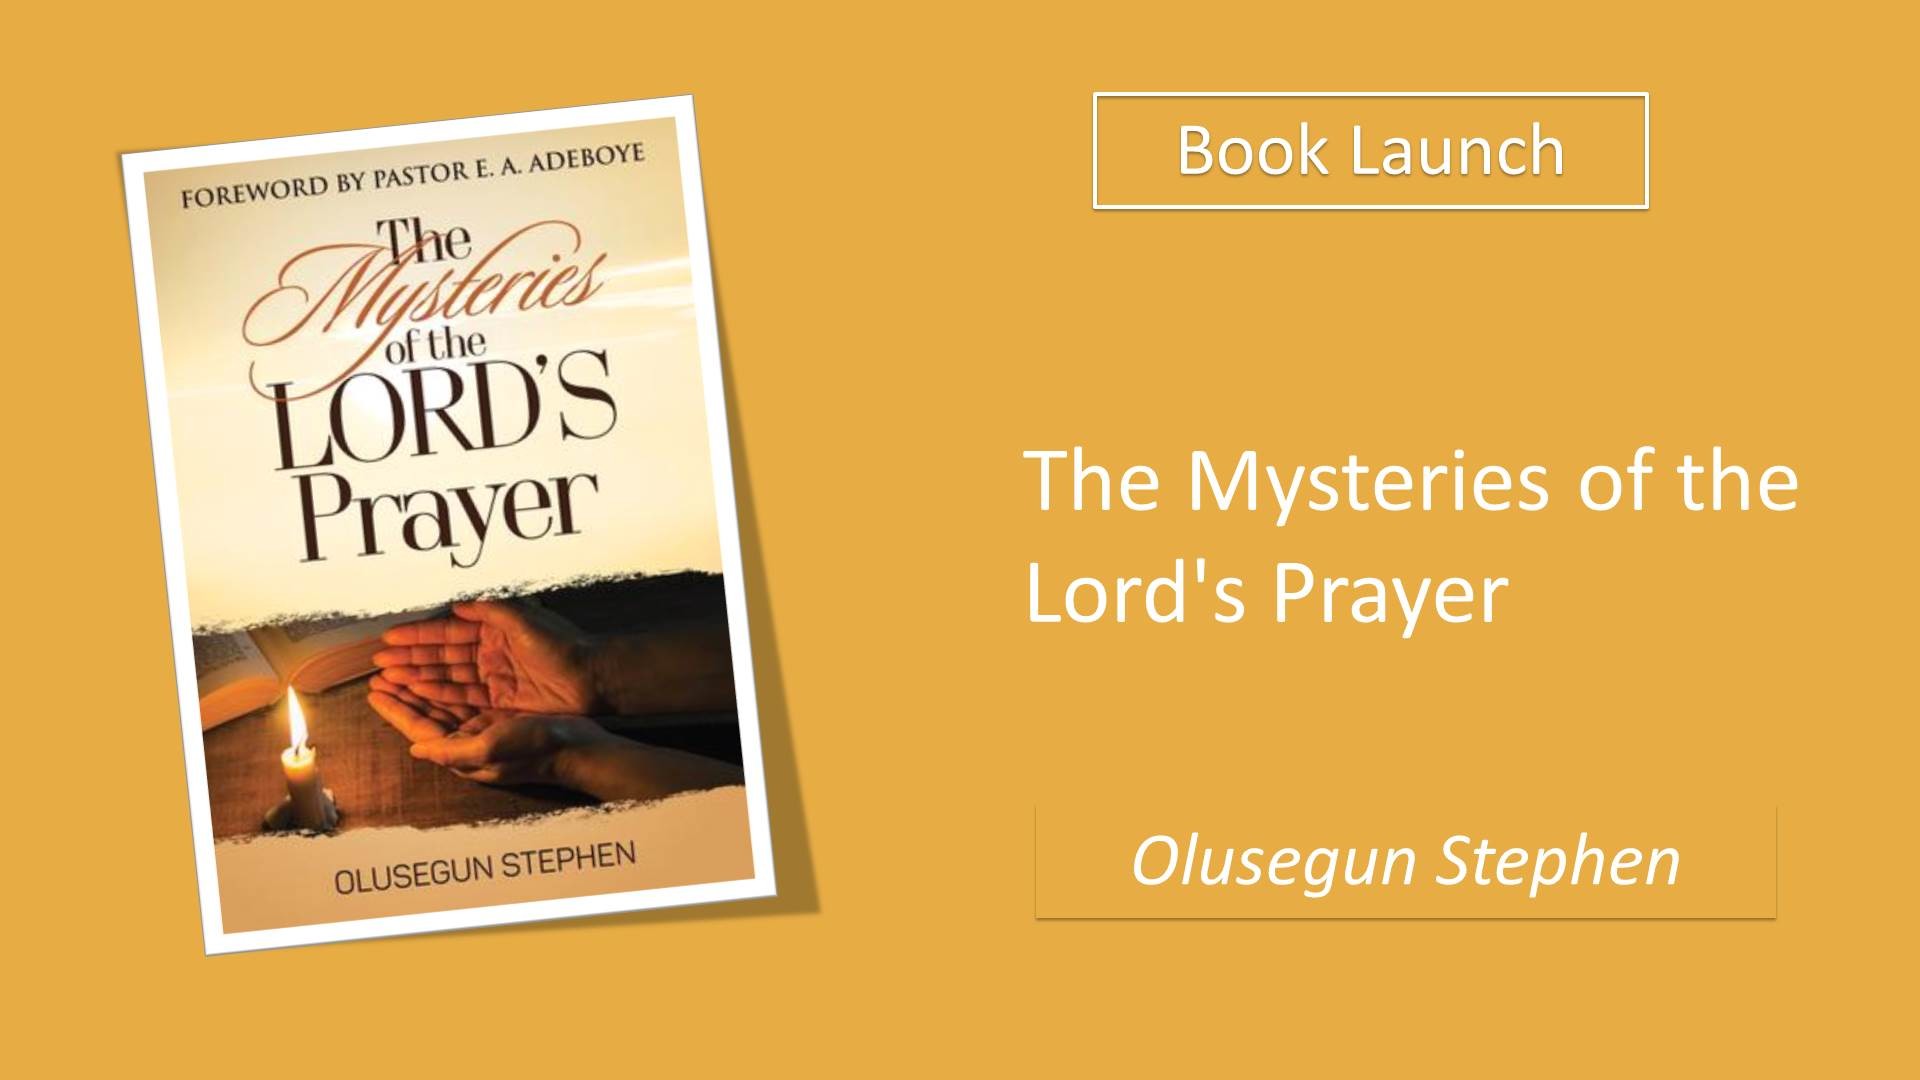 1920x1080 The Mysteries of the Lord's Prayer--Book launch